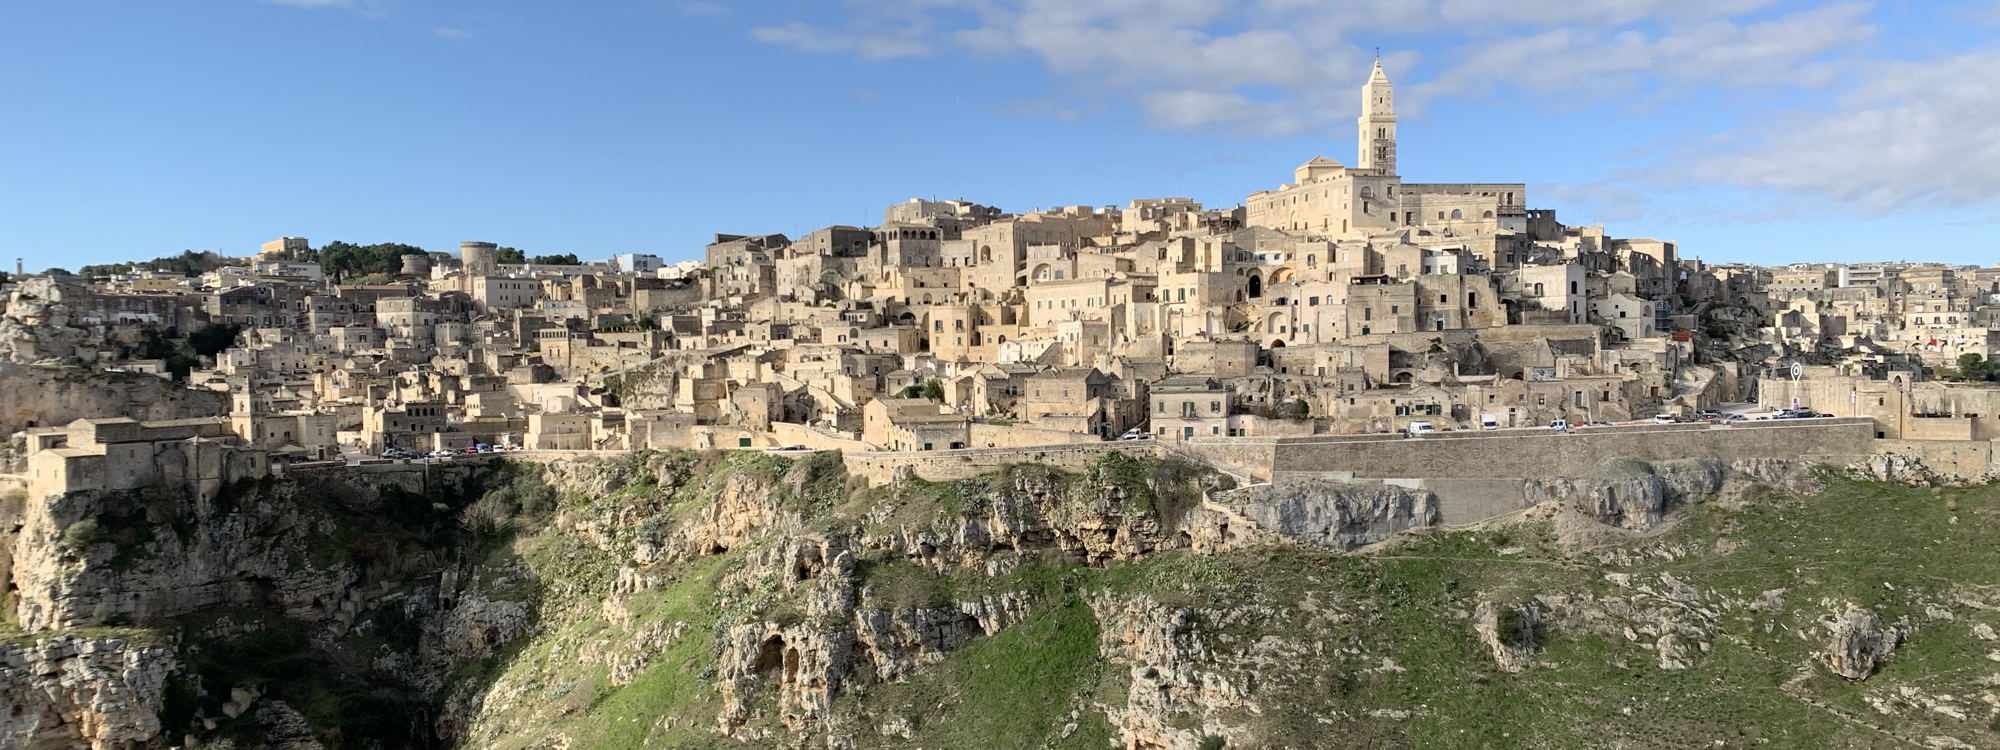 The city of Matera